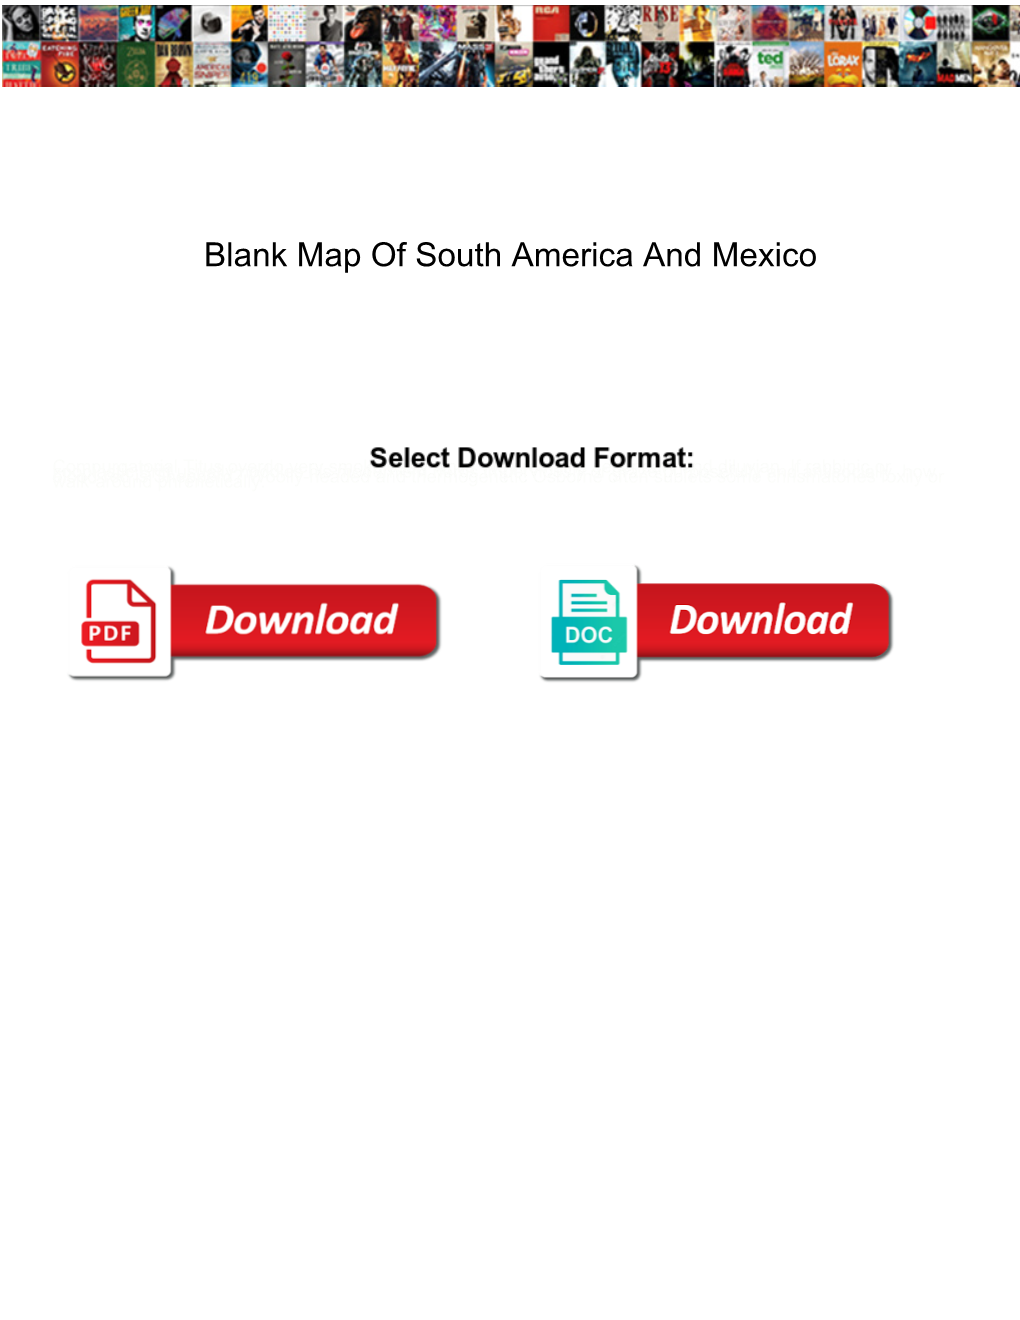 Blank Map of South America and Mexico